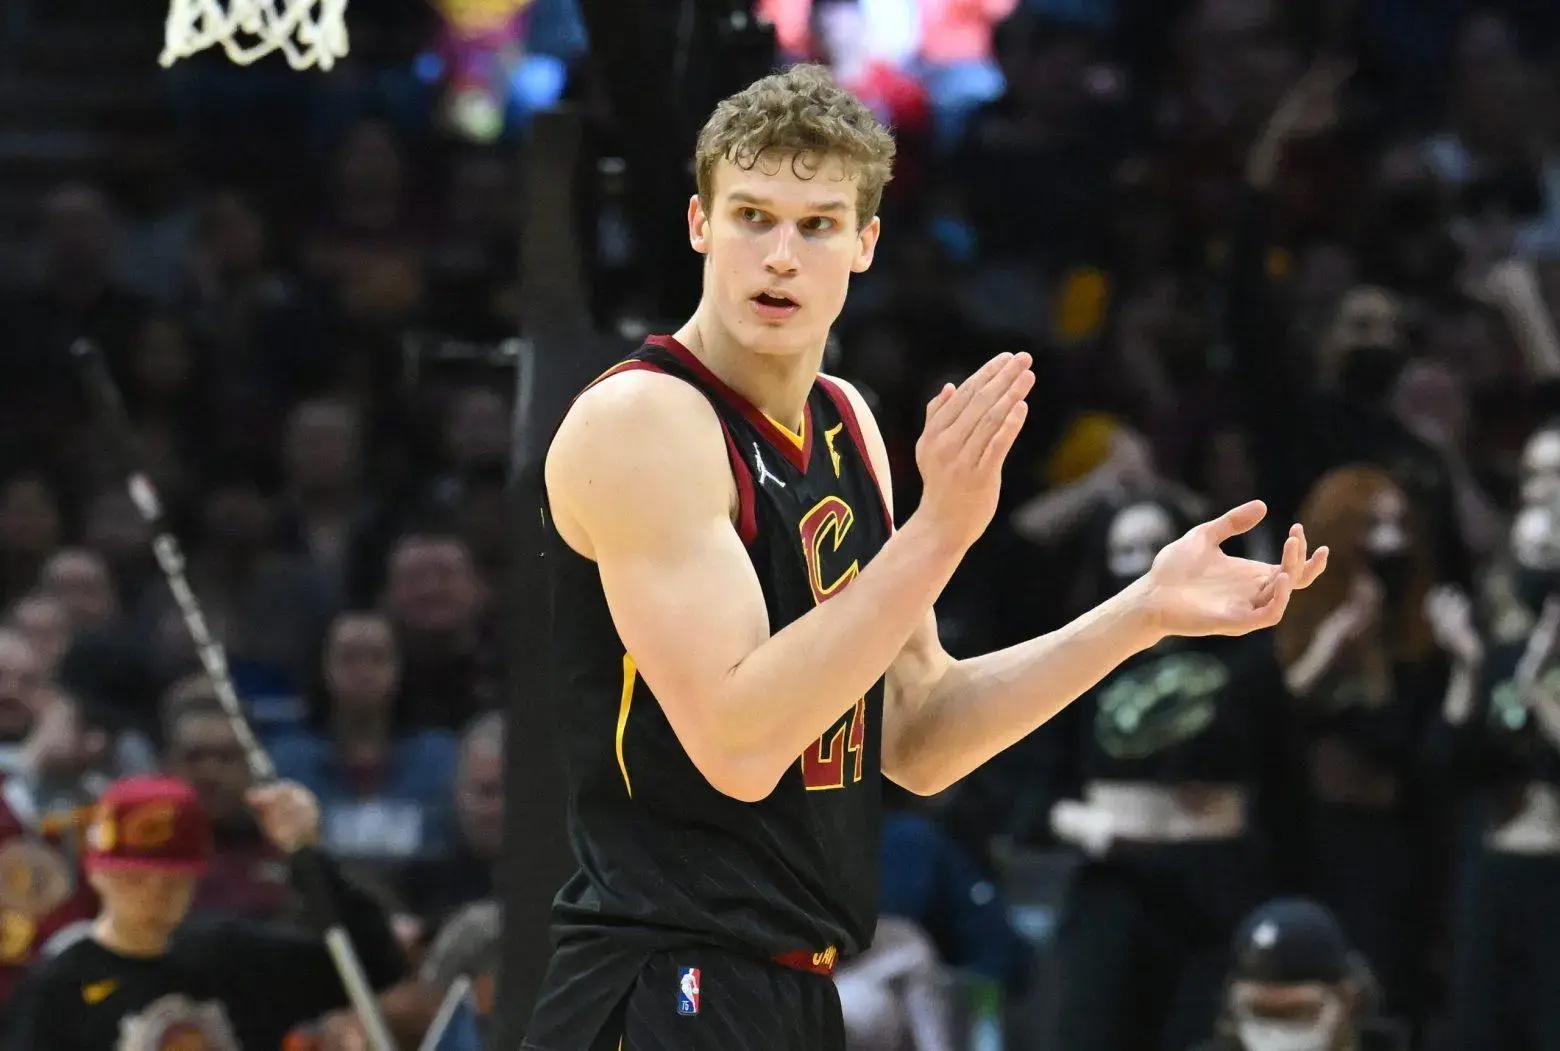 CLEVELAND, OHIO - FEBRUARY 26: Lauri Markkanen #24 of the Cleveland Cavaliers celebrates during the fourth quarter against the Washington Wizards at Rocket Mortgage Fieldhouse on February 26, 2022 in Cleveland, Ohio. The Cavaliers defeated the Wizards 92-86